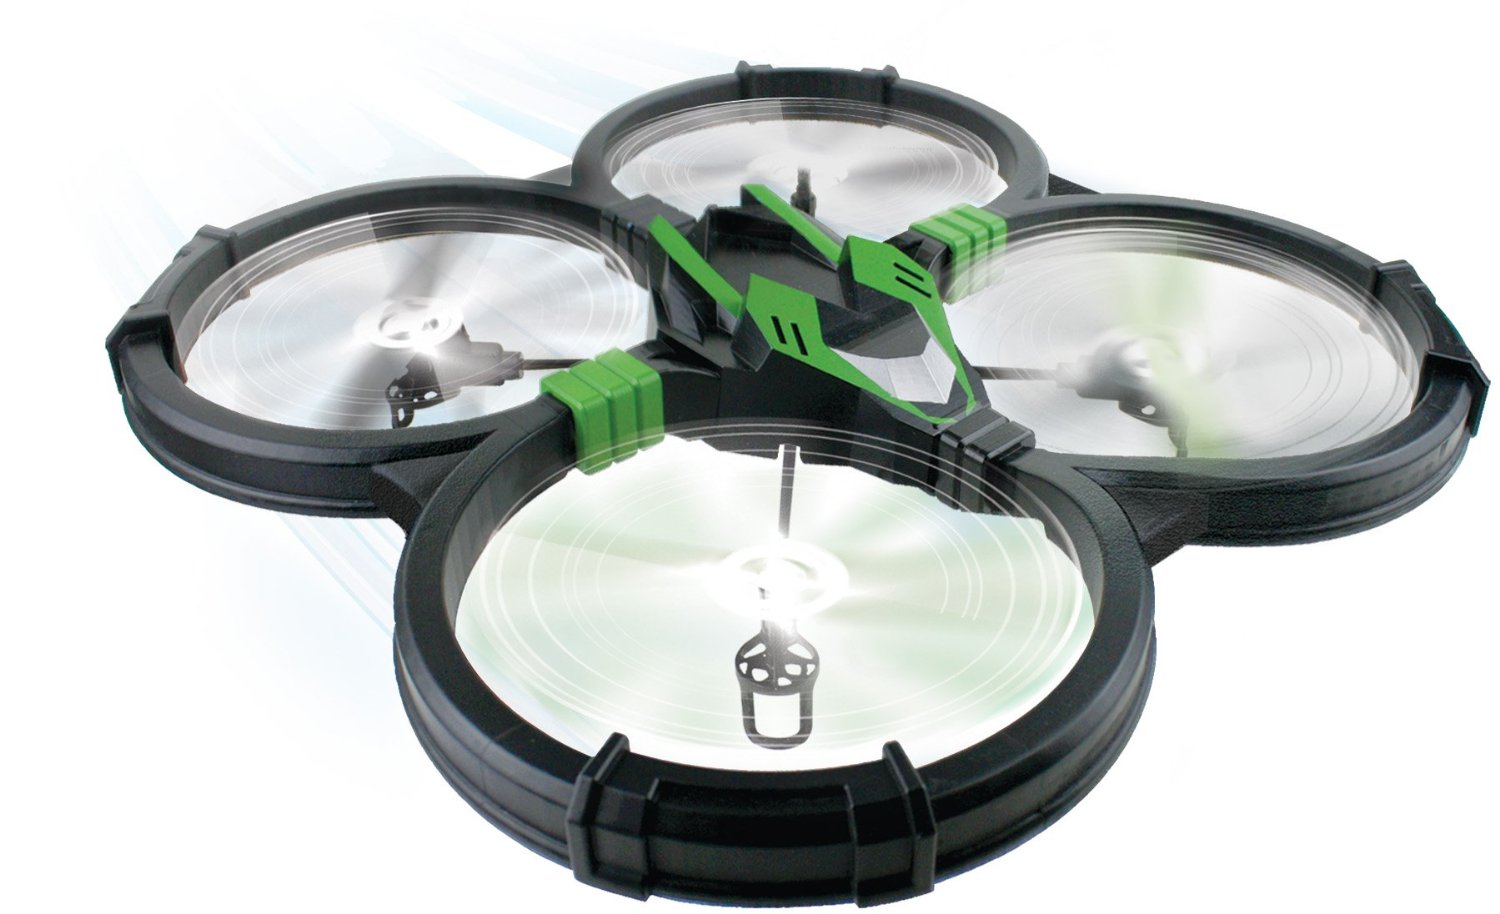 Sky Viper SR10002 Streaming Drone with FPV 